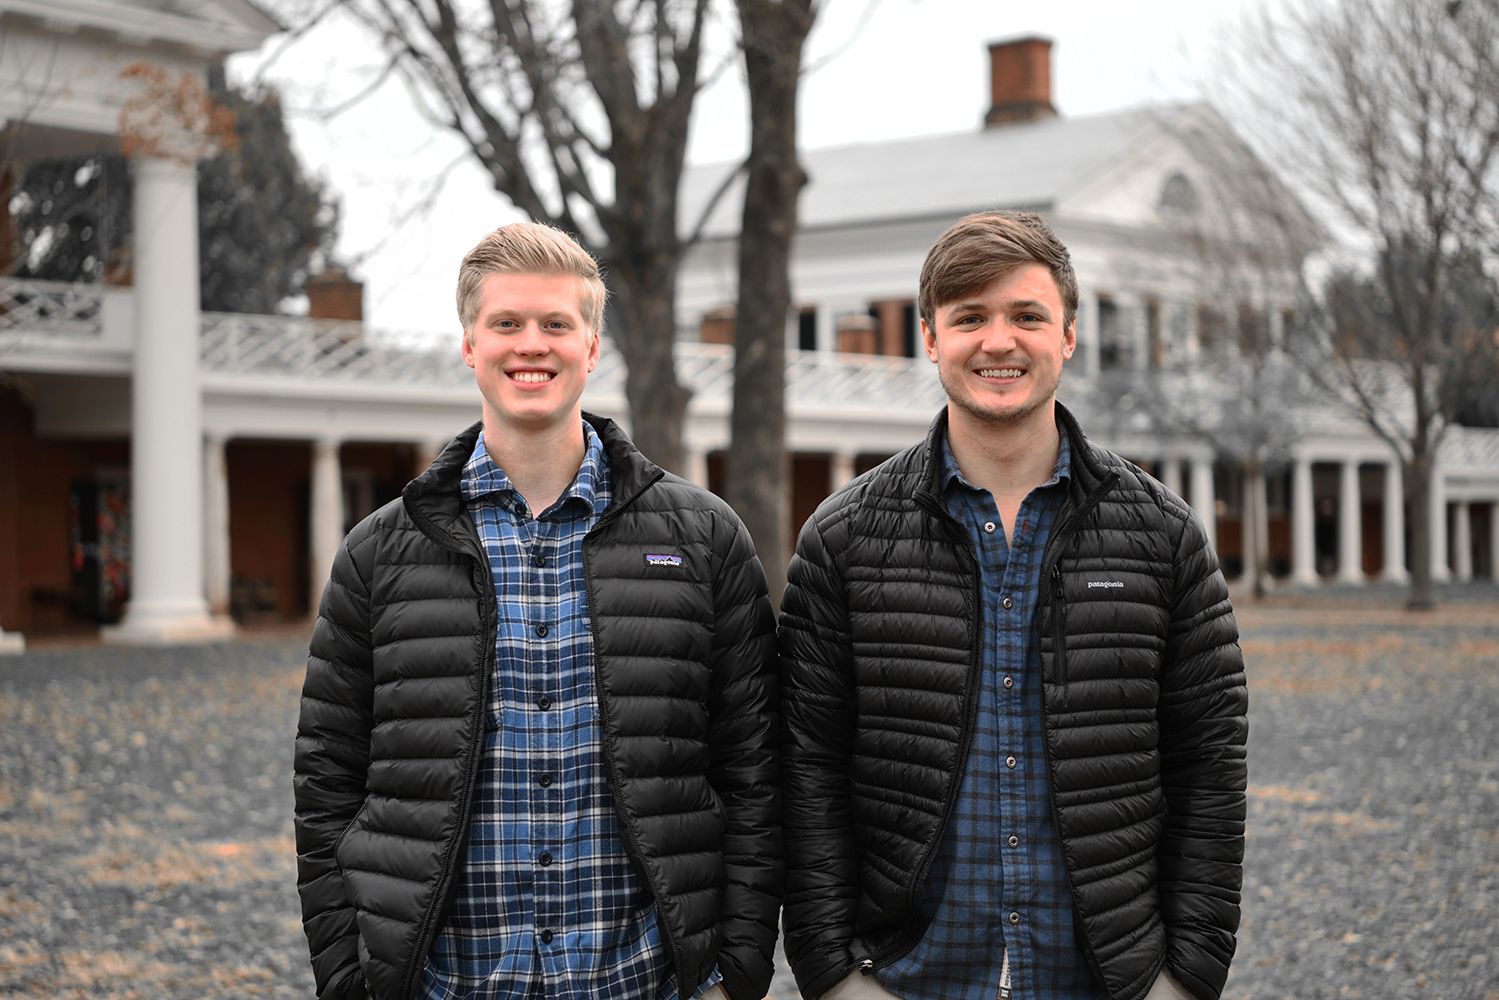 Conner Huston, left, and Parker Hamlin, right, stand together for a picture on the Lawn